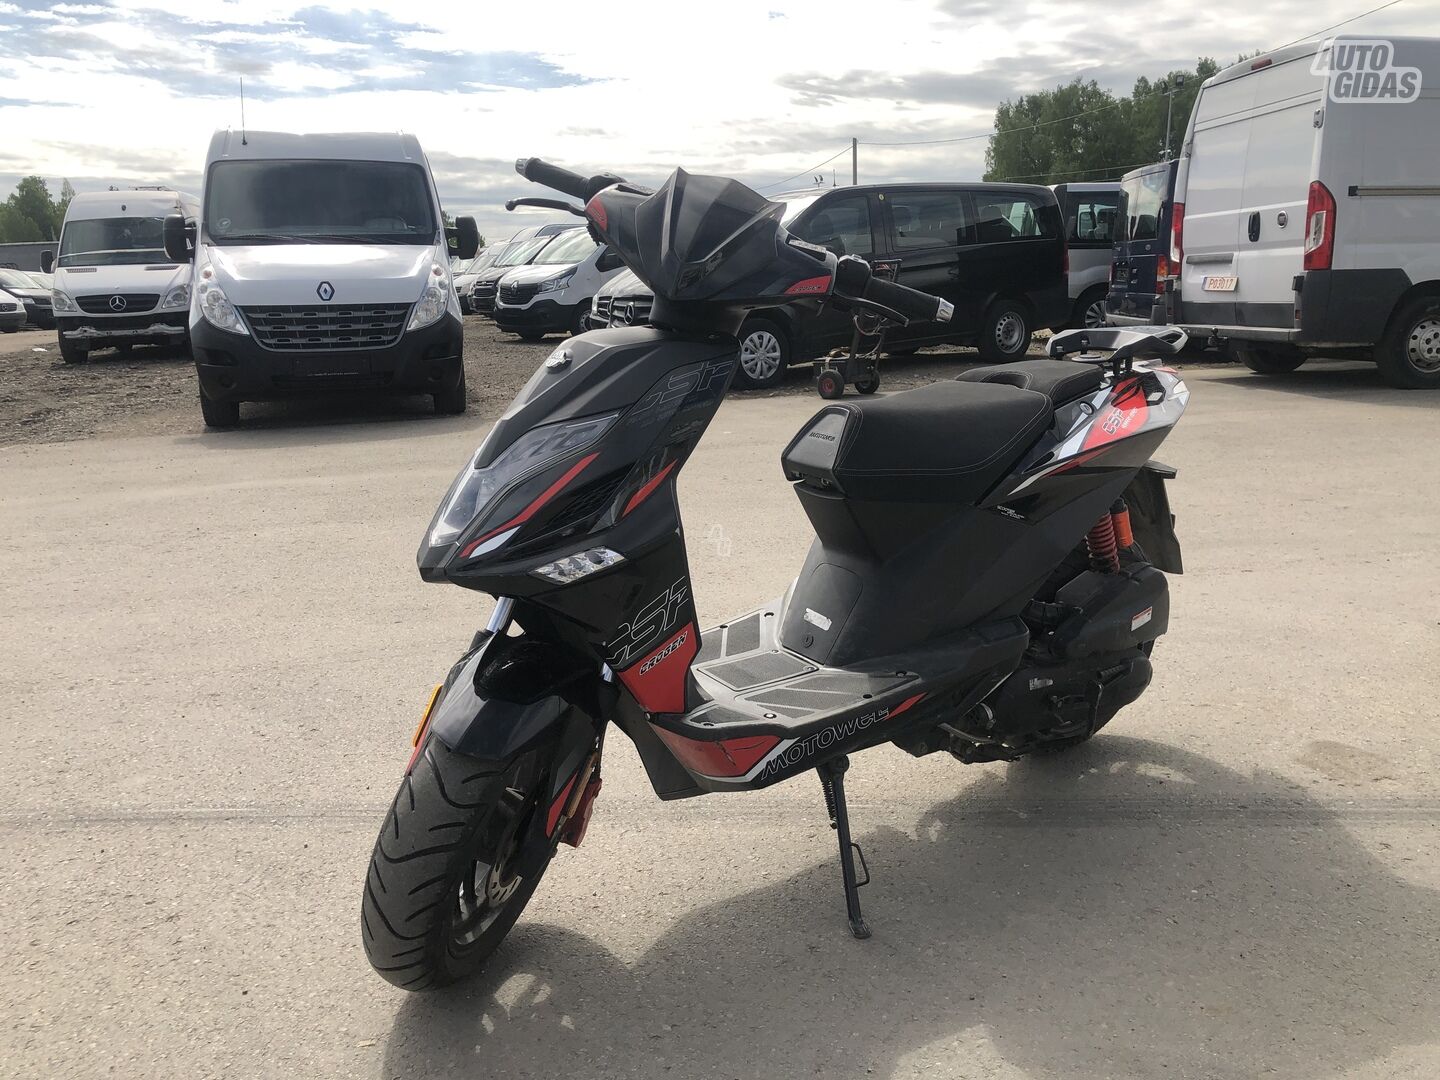 Motowell 2020 y Scooter / moped